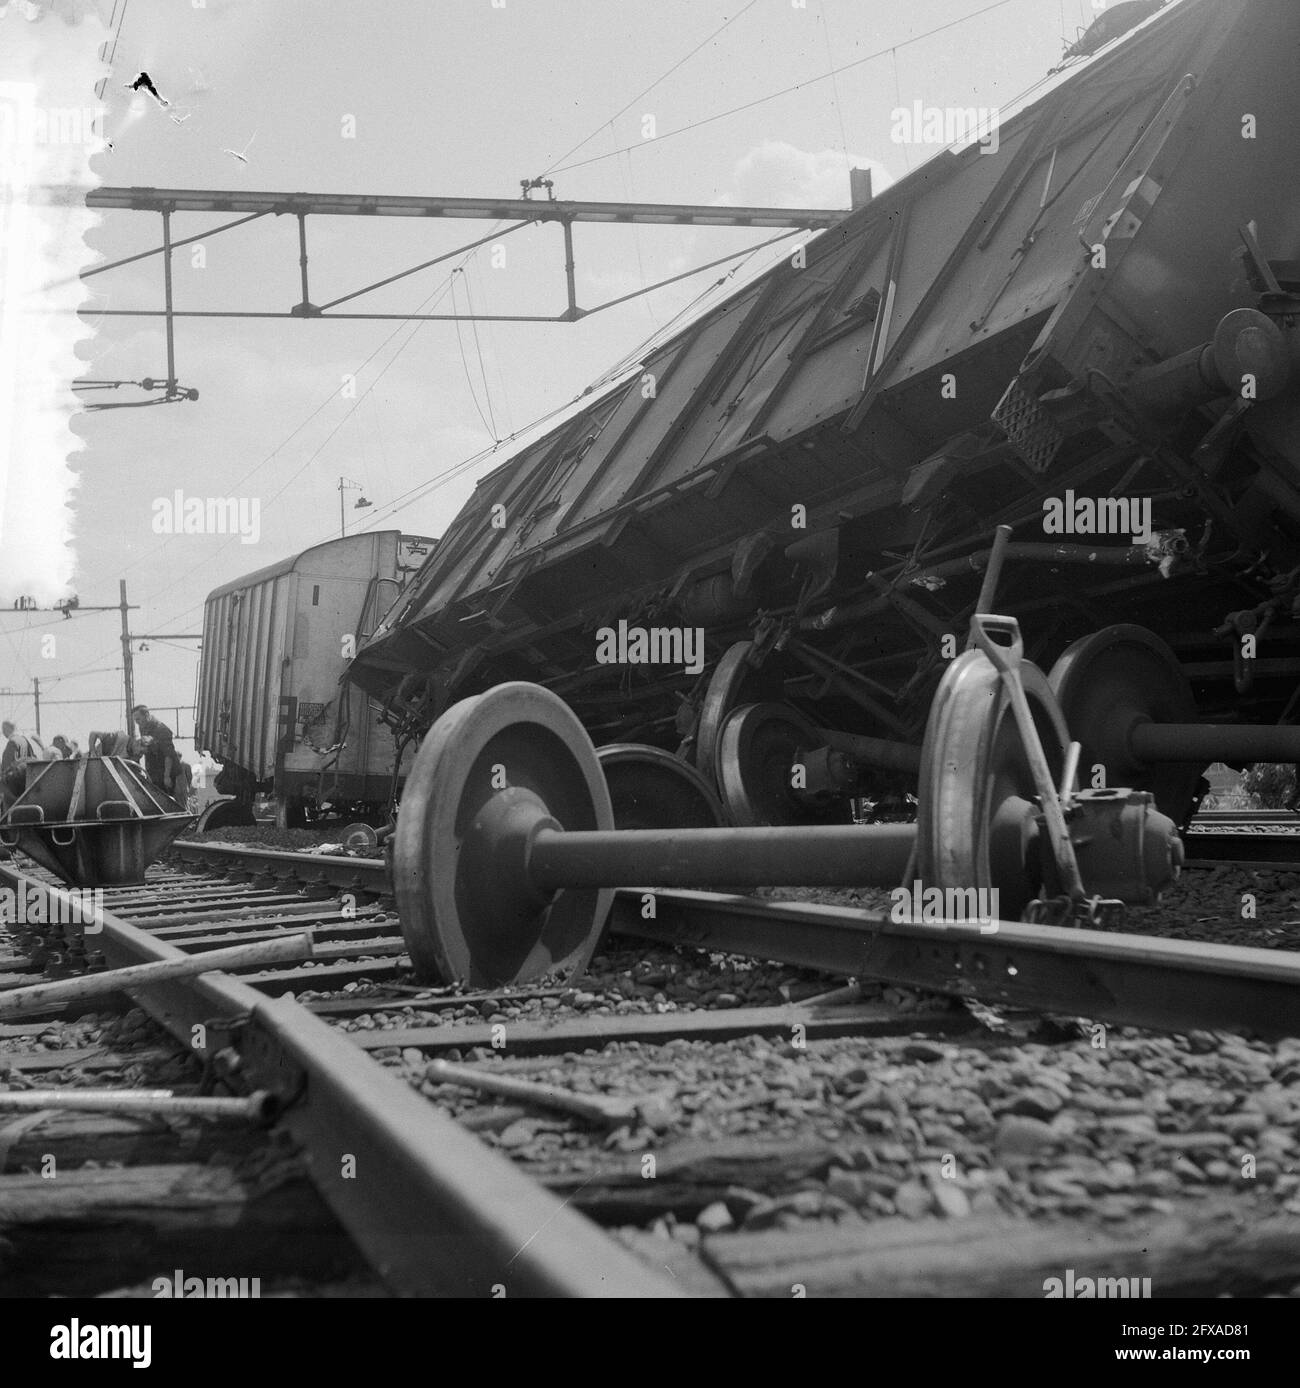 As a diesel passenger train from Utrecht C.S. drove through a red signal light, it collided with a freight train from Geldermalsen. The passenger train hit the freight train exactly on a switch in the side. Four goods wagons toppled over, a fifth derailed. The havoc was great but everyone was unharmed, 14 August 1964, accidents, railroads, trains, The Netherlands, 20th century press agency photo, news to remember, documentary, historic photography 1945-1990, visual stories, human history of the Twentieth Century, capturing moments in time Stock Photo